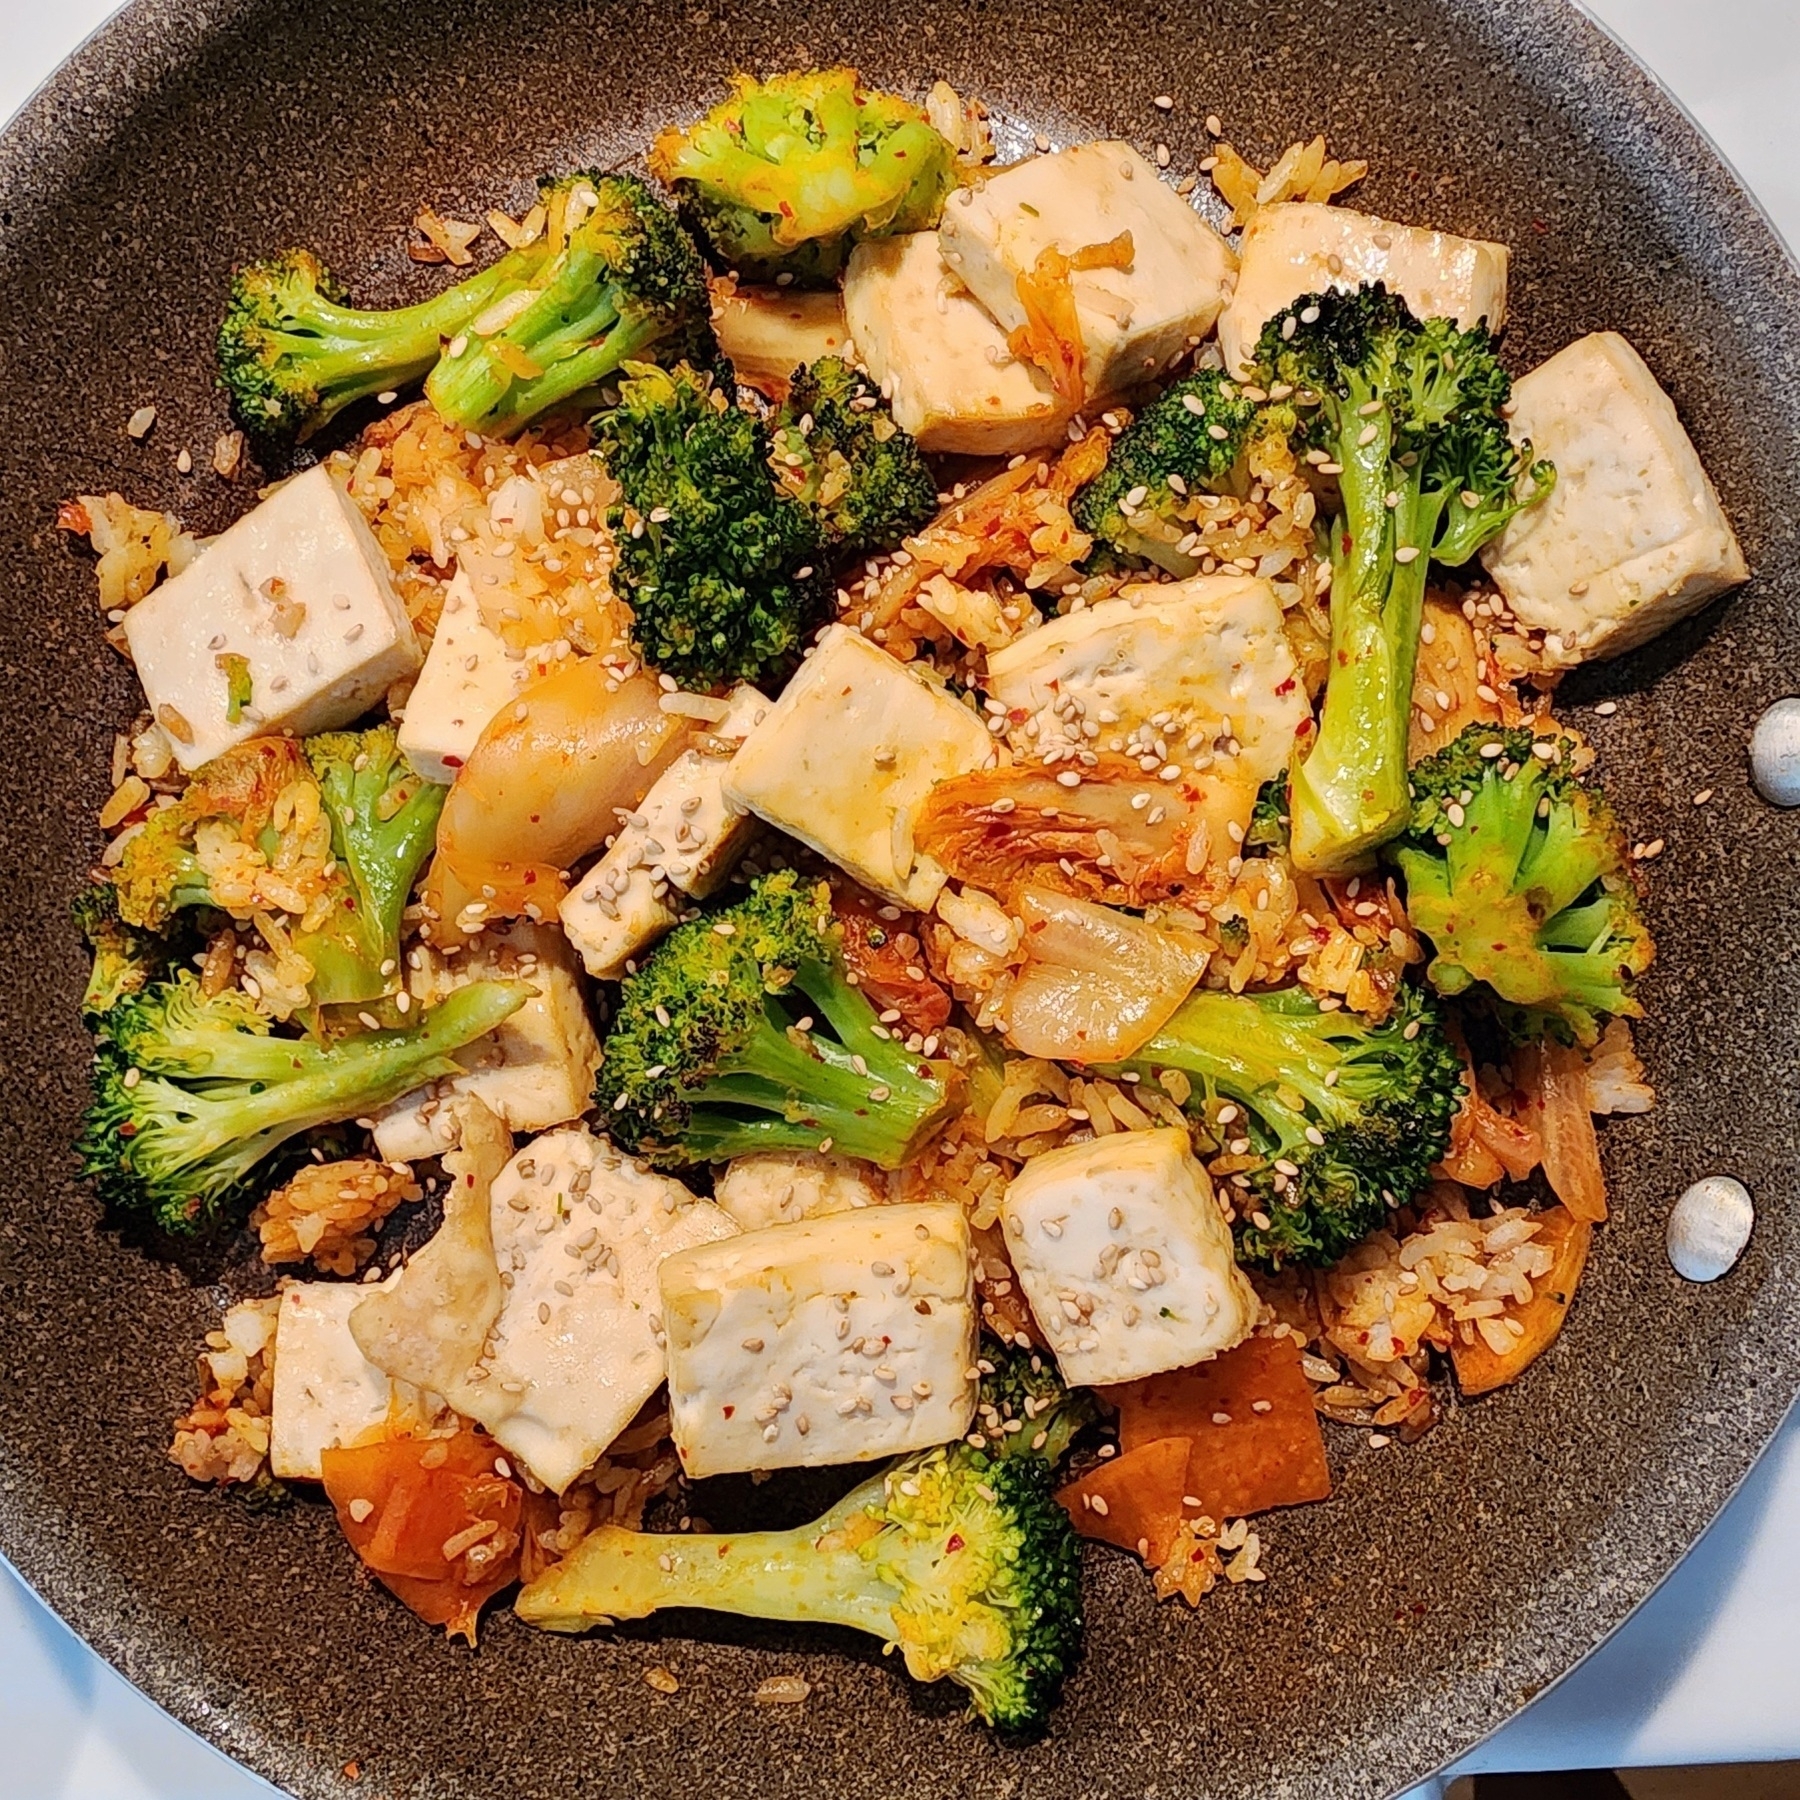 Tofu, broccoli, kimchi, and rice combined in a skillet